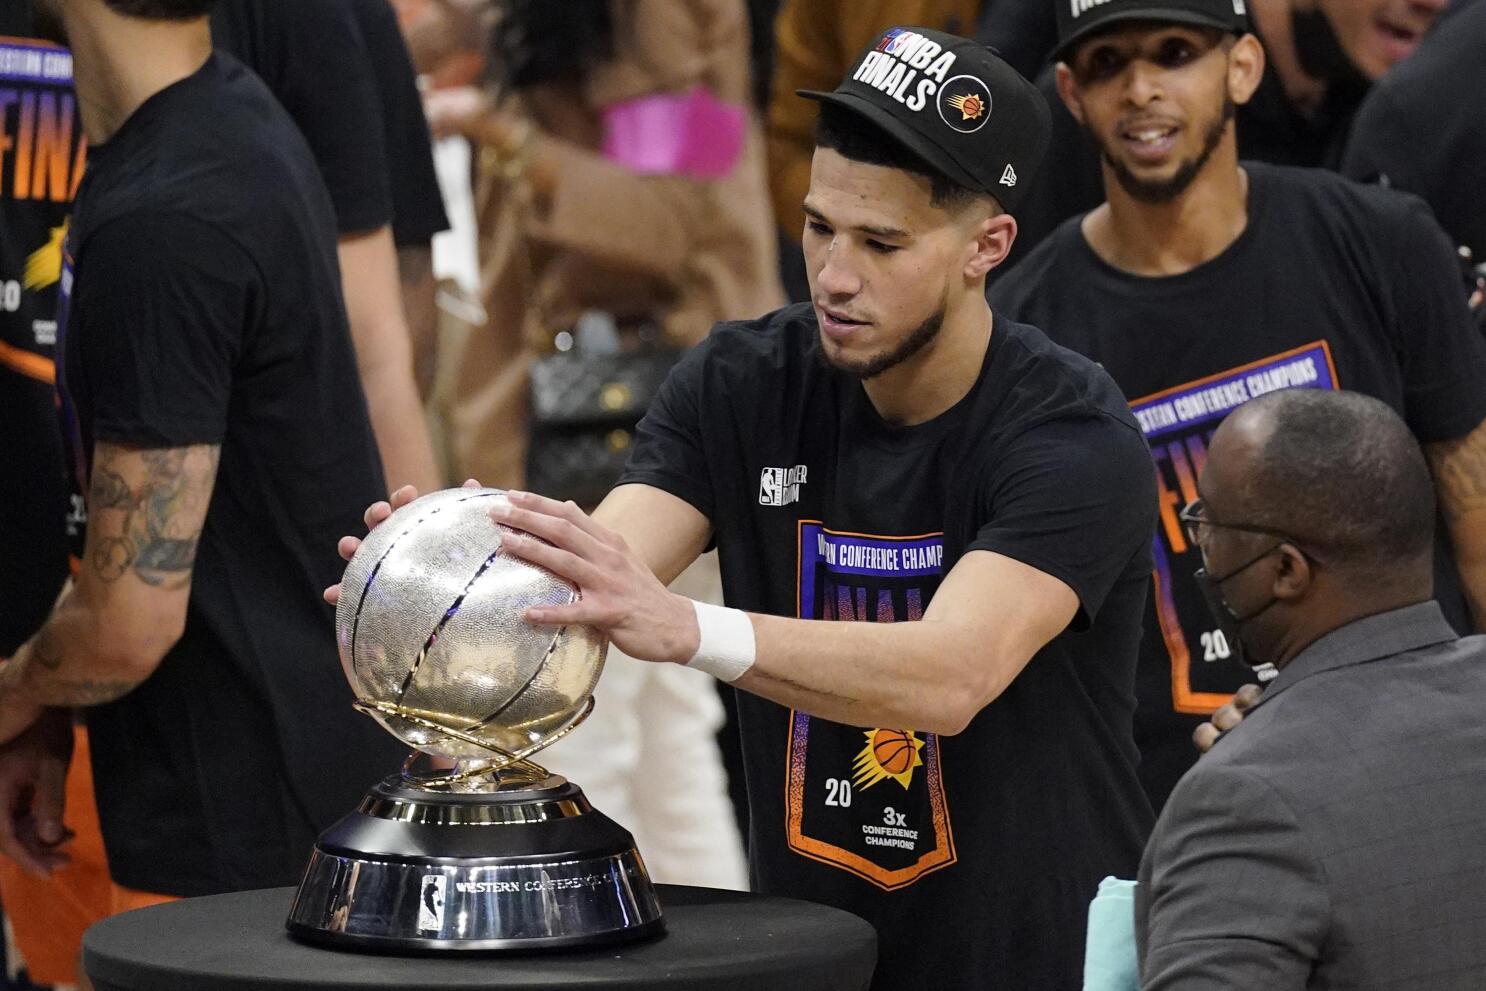 Phoenix Suns NBA Finals shirts, hats: How to shop for Western Conference  championship gear 